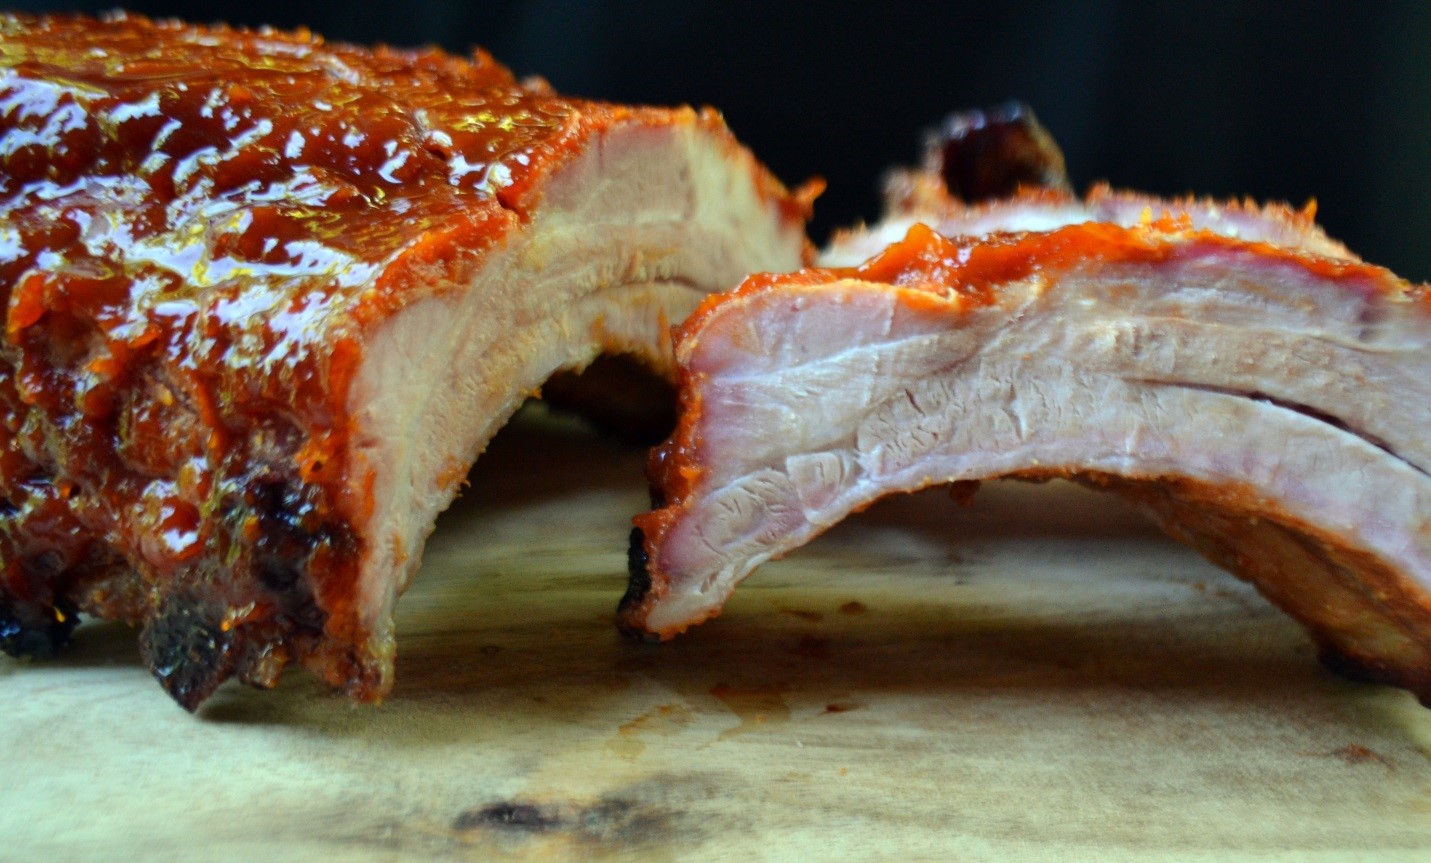 What is the difference between St. Louis style ribs and other ribs? - Quora